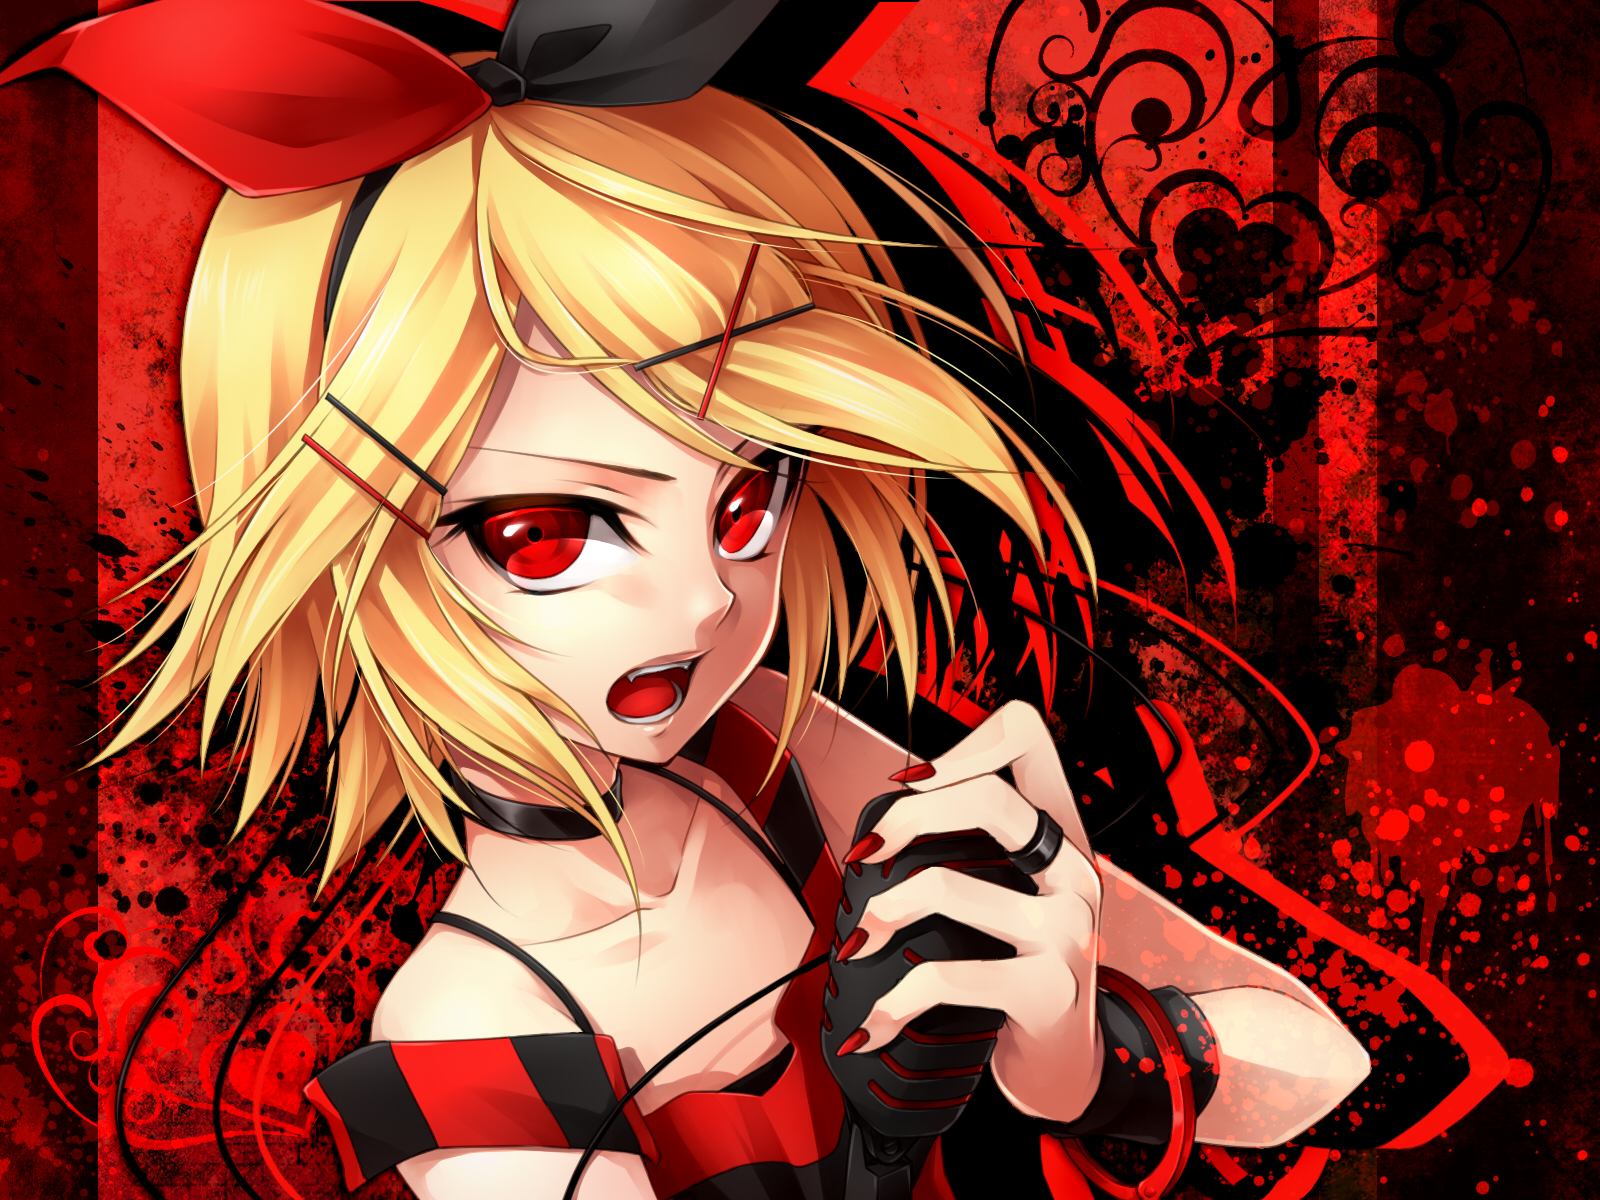 Image Of Rin Kagamine Wallpaper Anime Vice